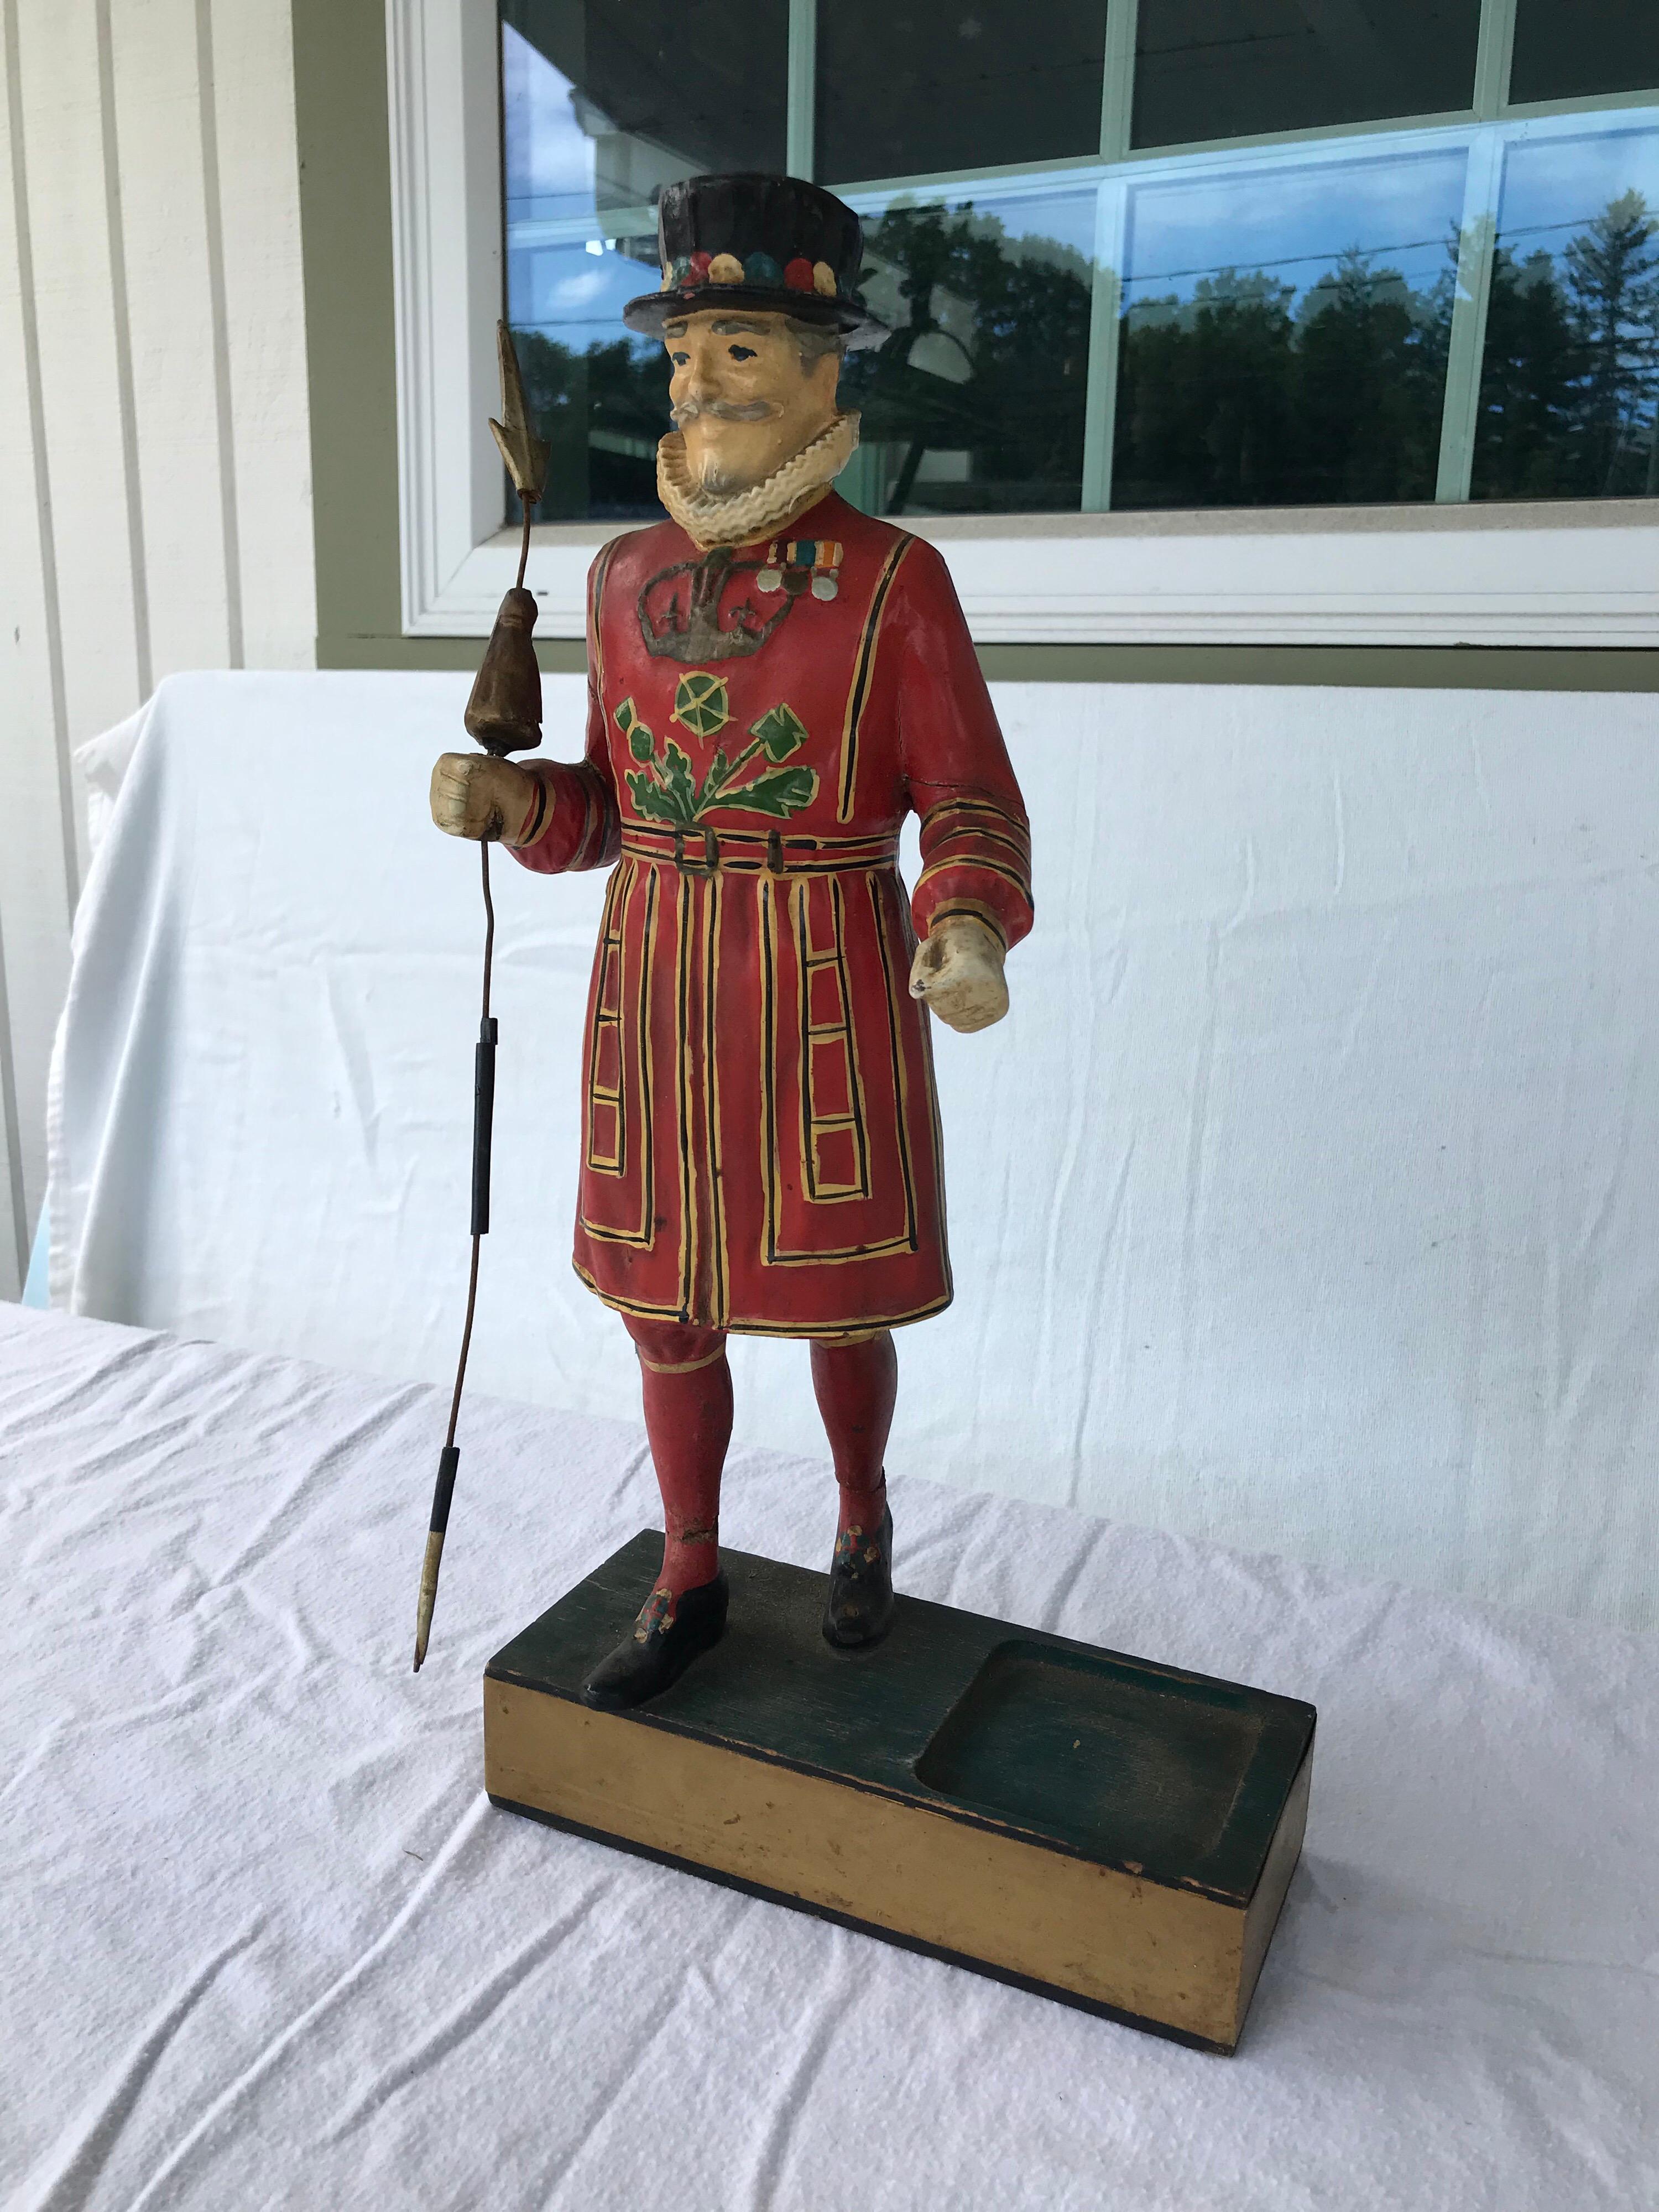 Vintage beefeaters gin bar display advertisement figurine. Wearing a yeoman (Queen's body guard) Warden Outfit and holding a quiver. There is space next to the figure for the bottle to be placed, circa 1950s. Please confirm dimensions prior to